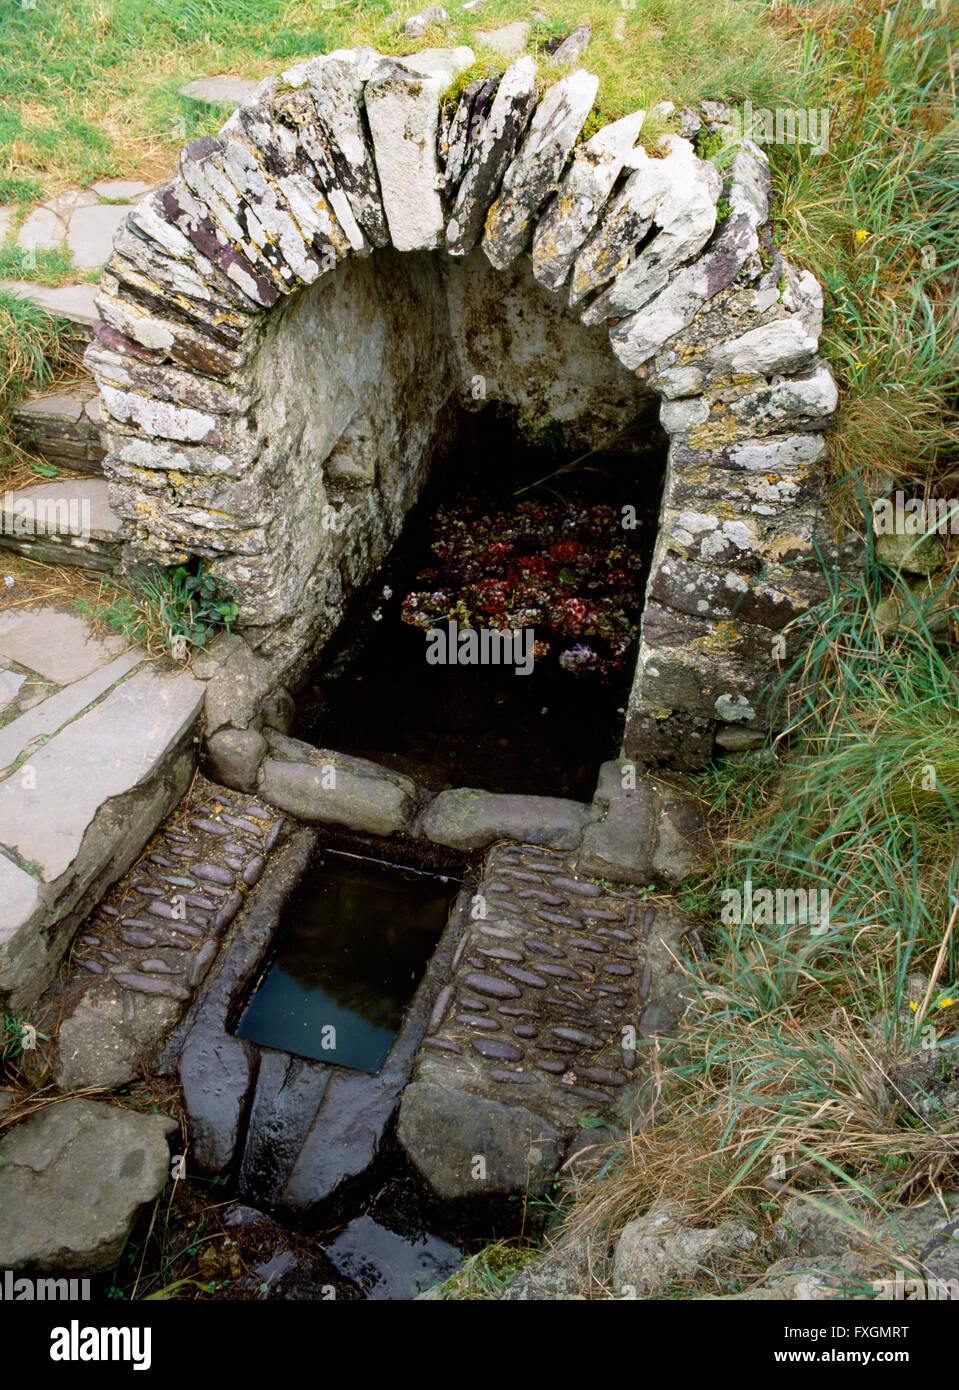 St Non's holy well near St David's, Pembrokeshire, renowned for its miraculous and healing powers, especially for eye conditions. Stock Photo